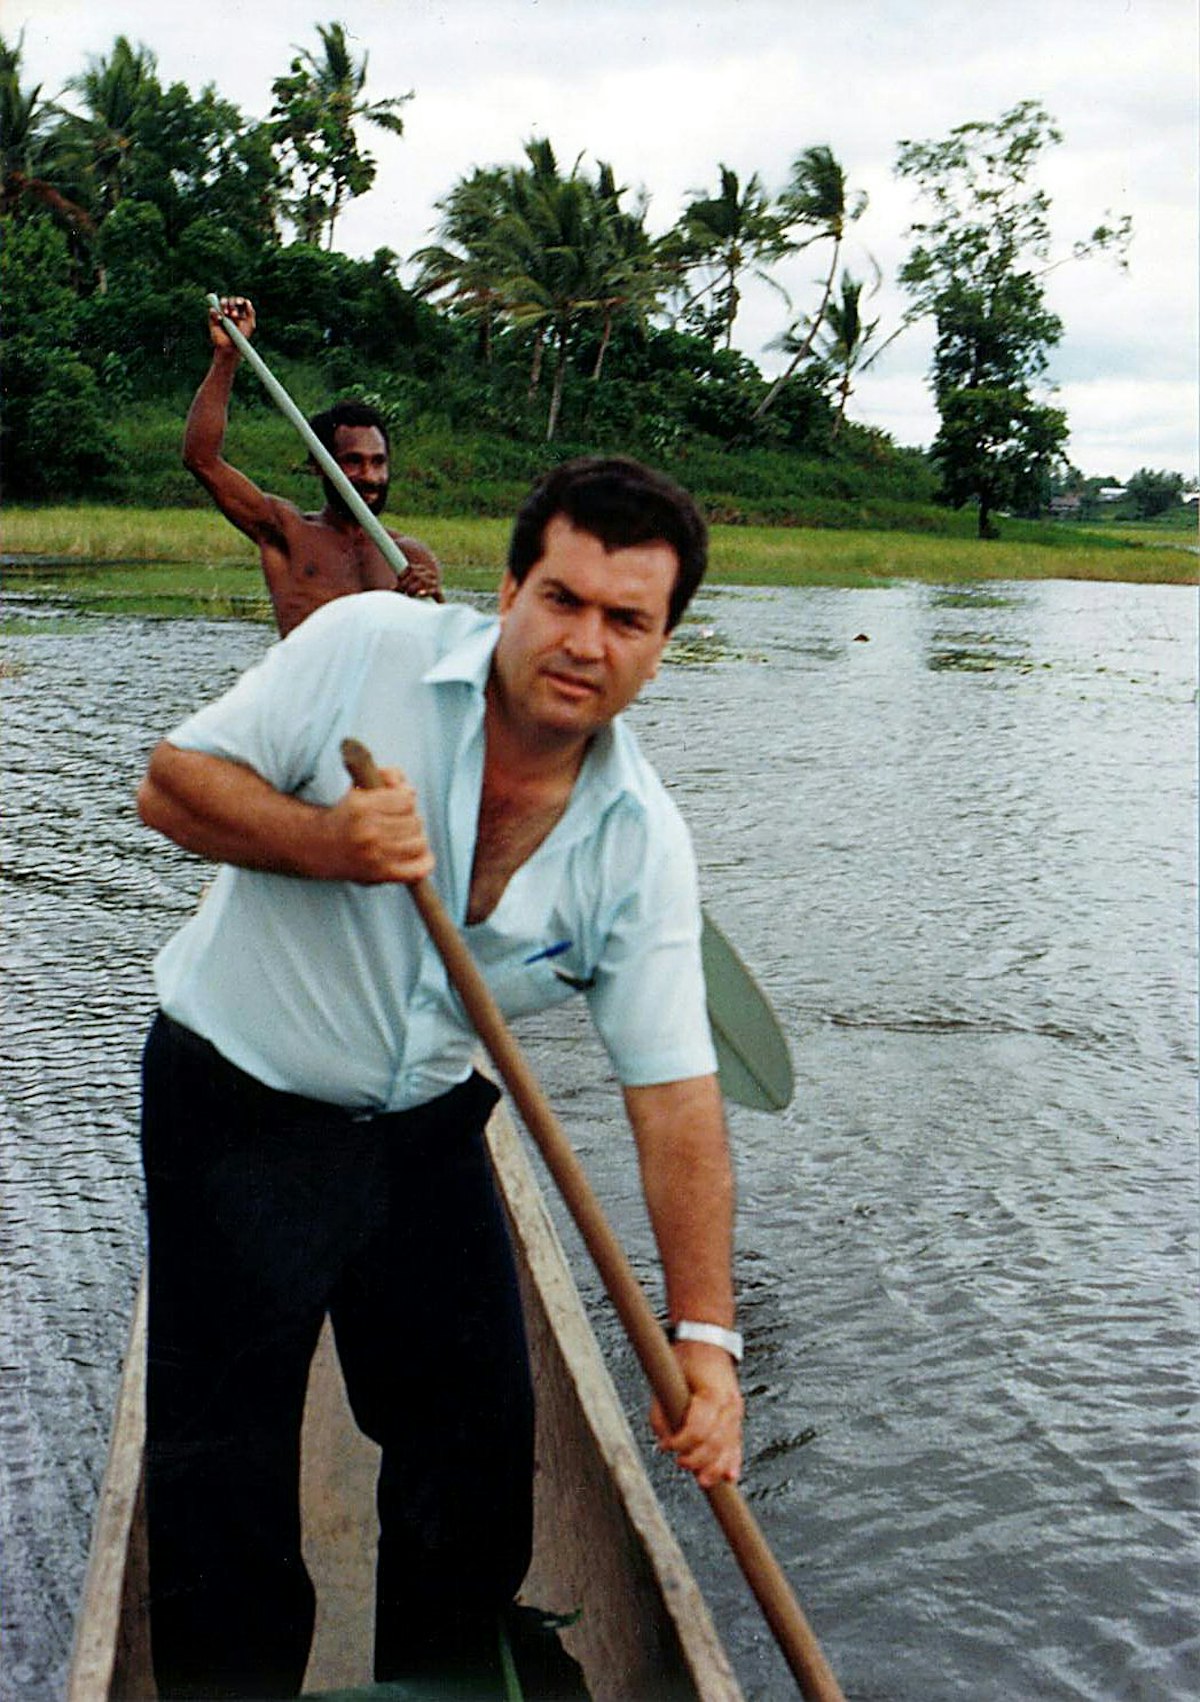 Sirus Naraqi spent much of his free time visiting remote areas of Papua New Guinea, providing medical treatment and giving advice to Baha'i communities.